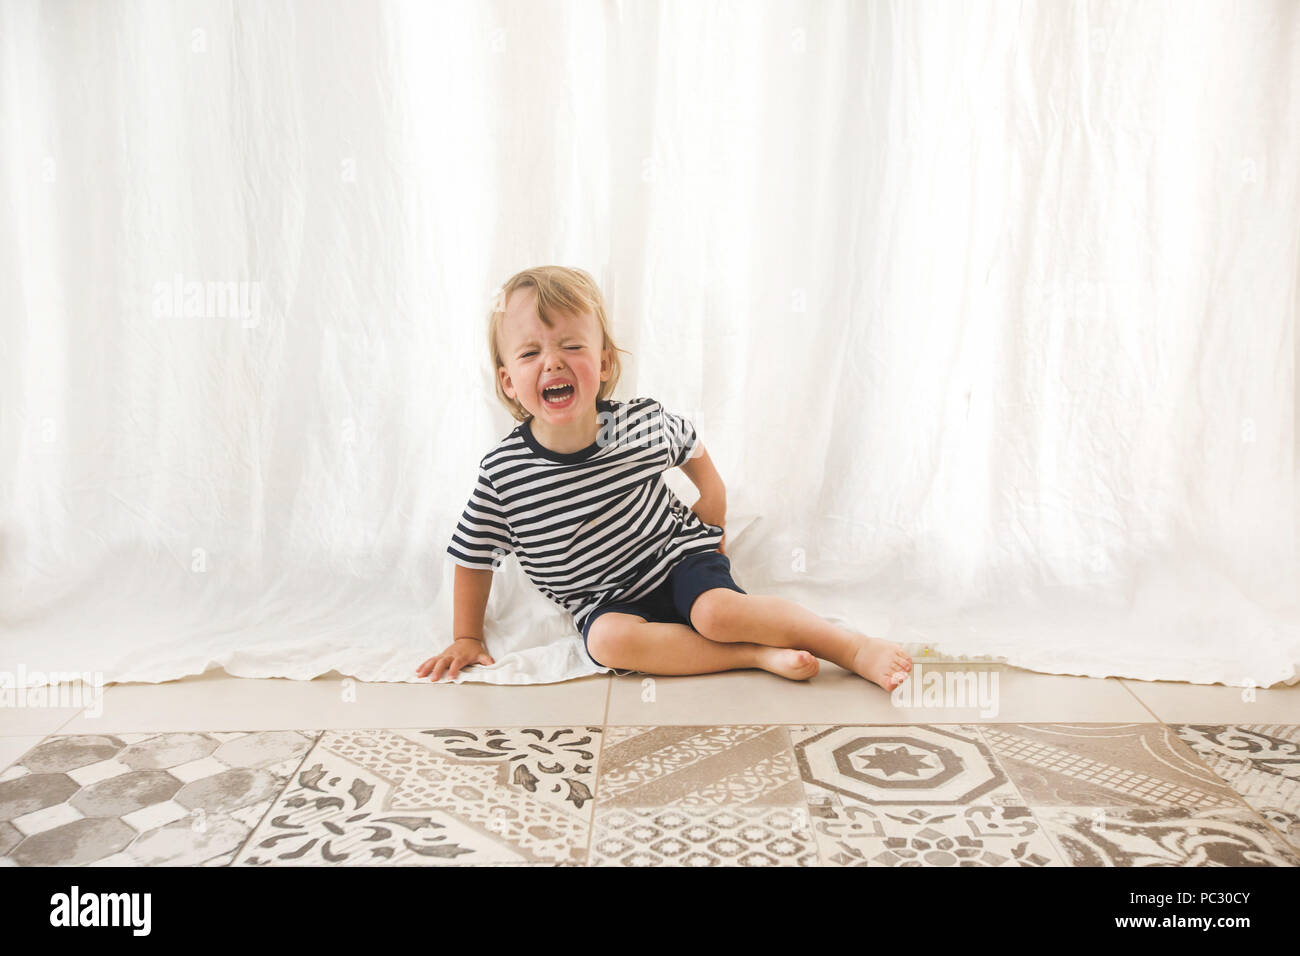 Screaming little boy crying on floor Stock Photo